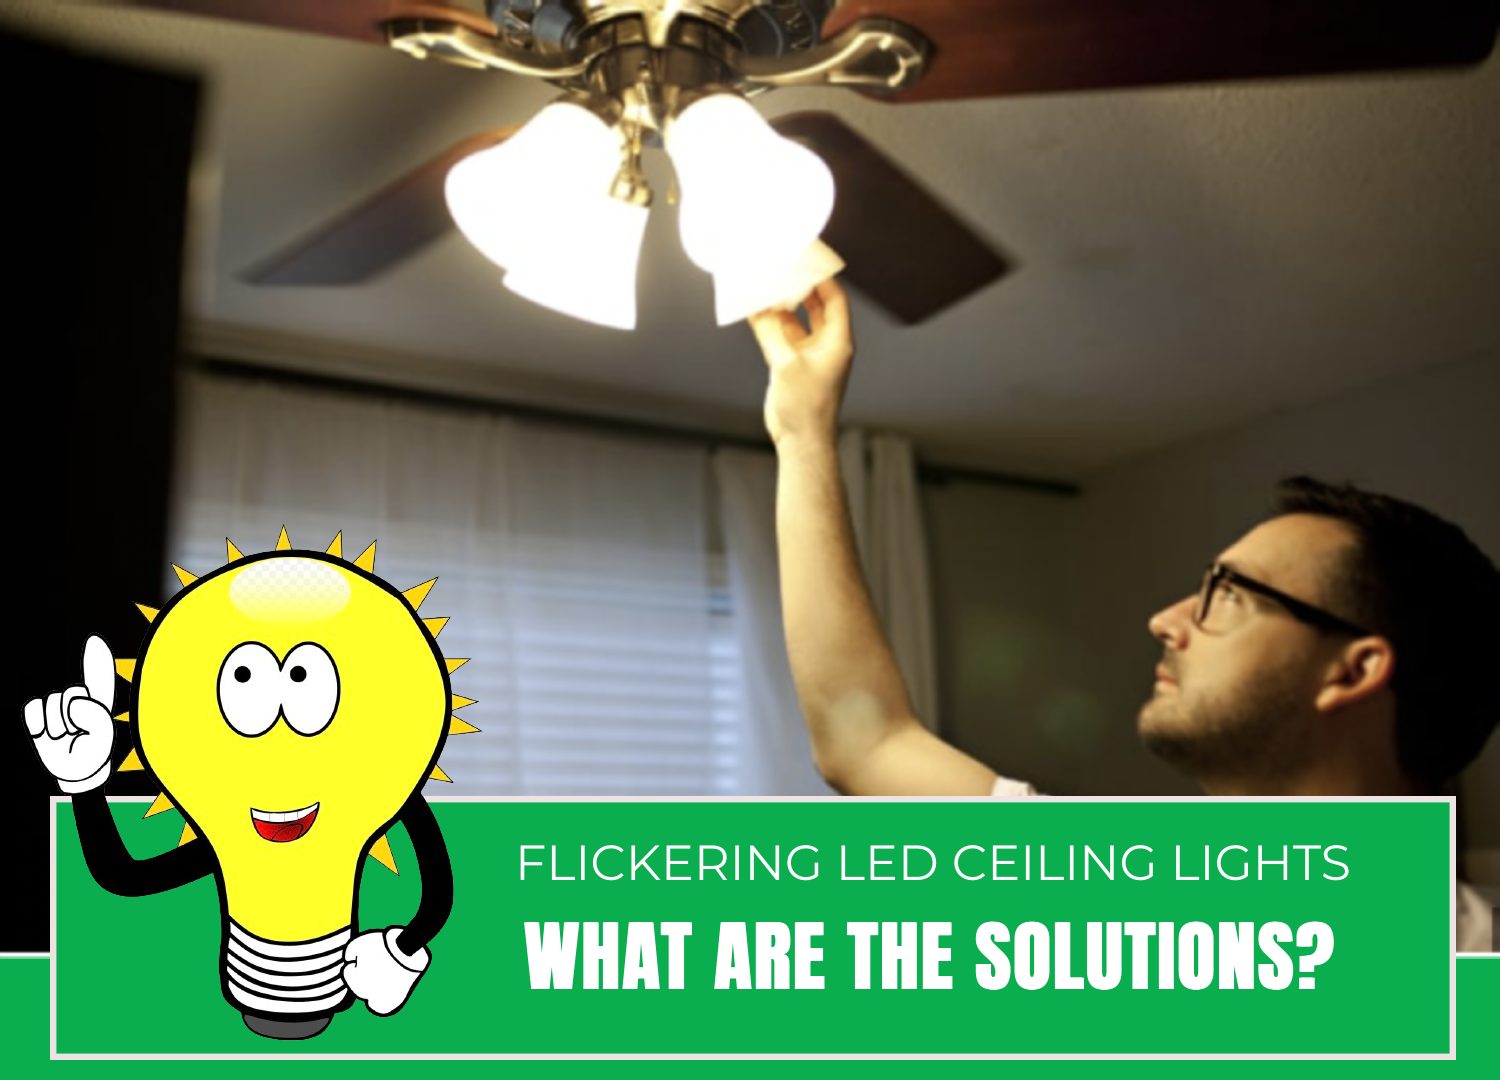 Flickering LED Ceiling Lights- What Are the Solutions?